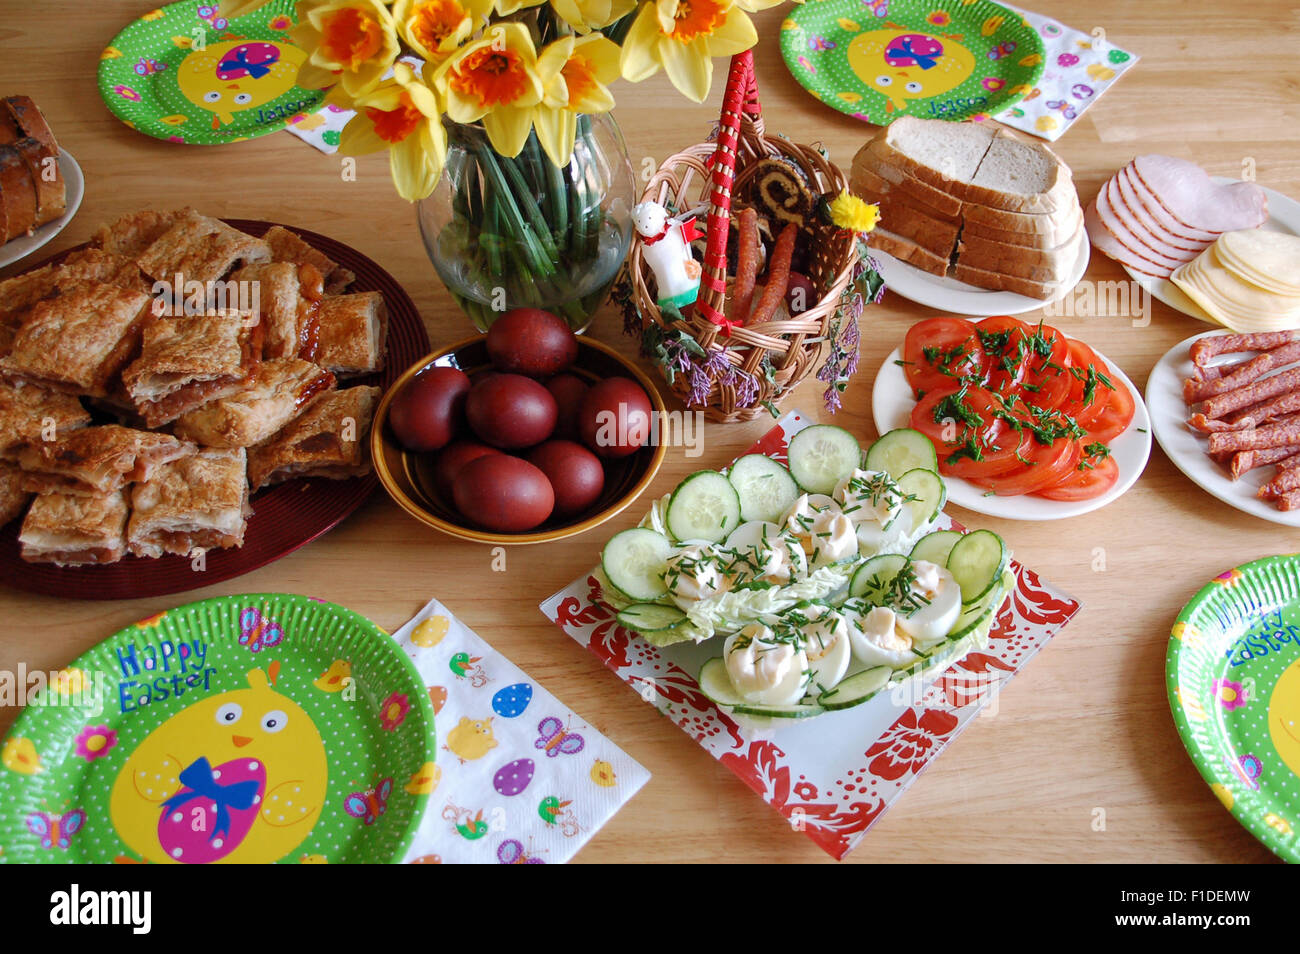 Traditional Polish Easter Sunday Breakfast Laid Out On A Wooden Table Stock Photo Alamy